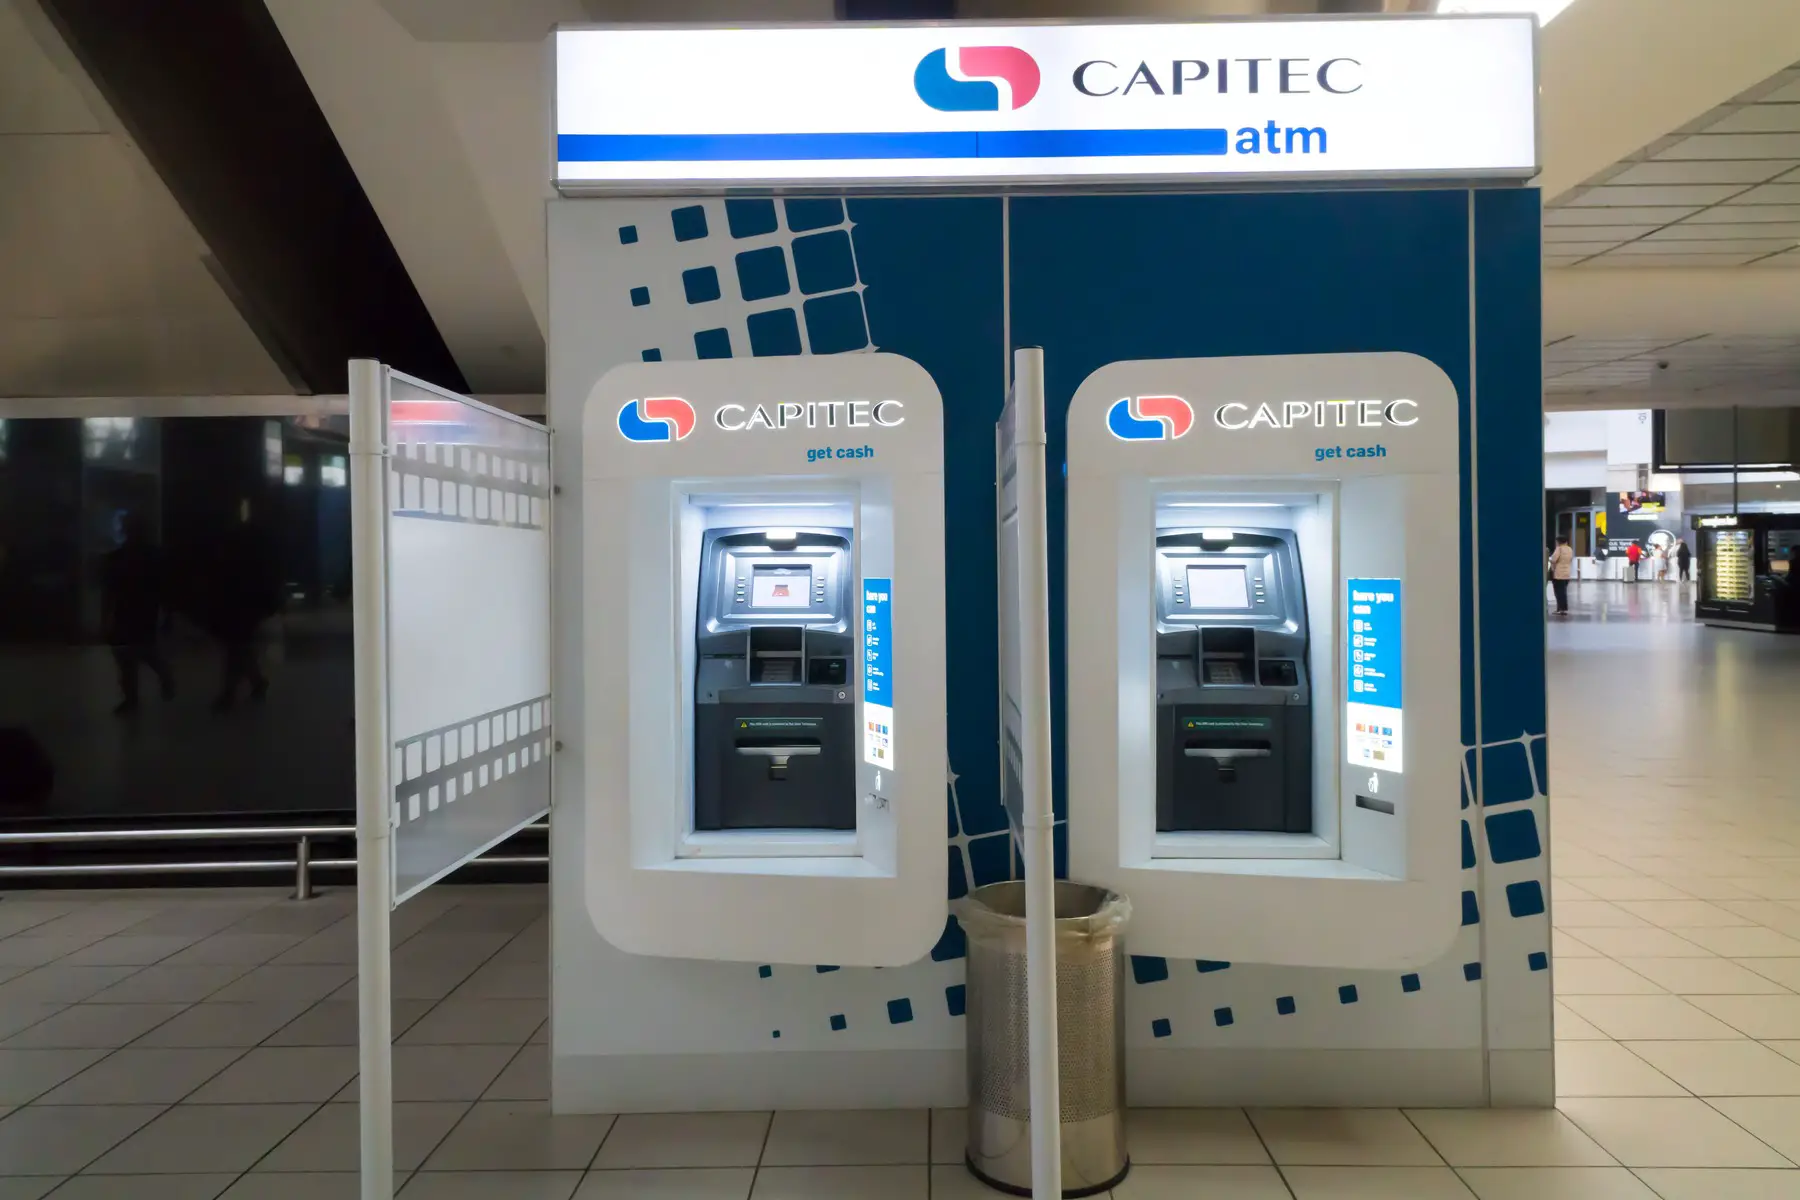 two Capitec bank ATMs side by side in a South African mall